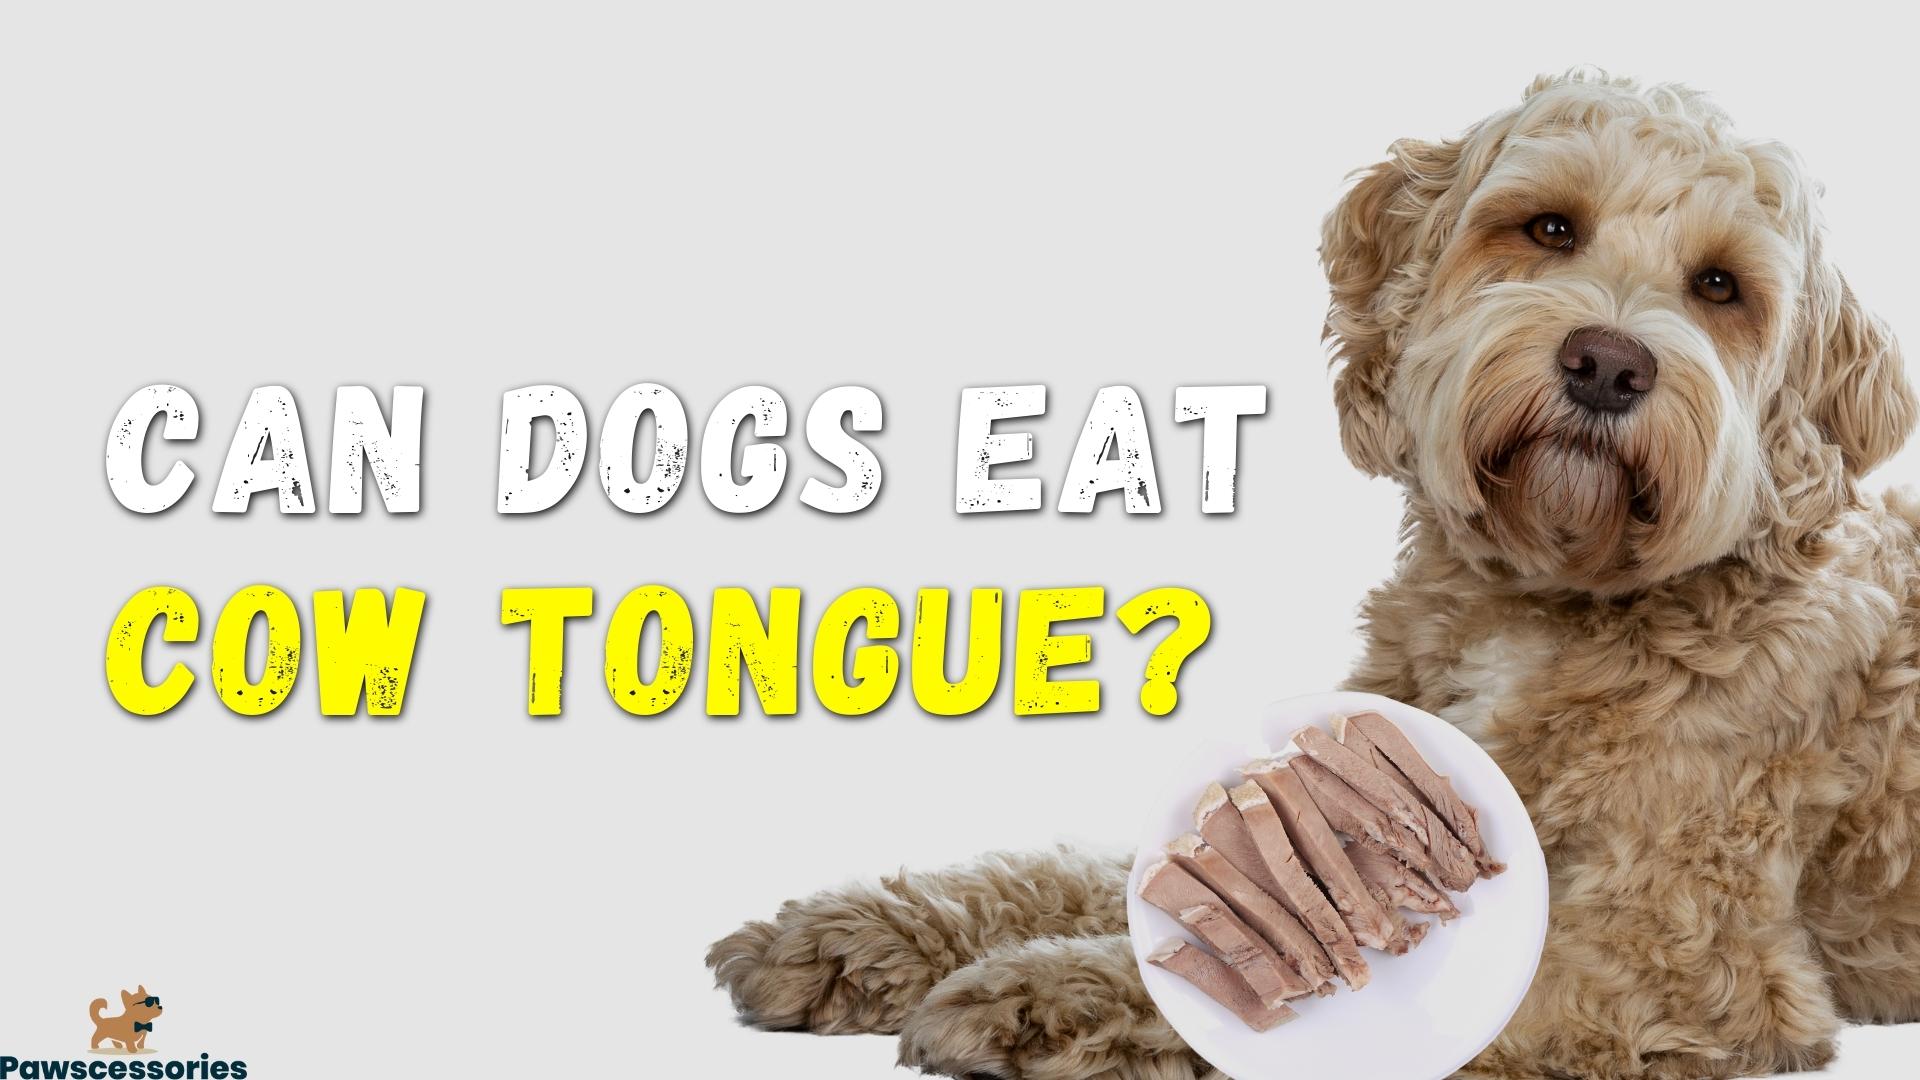 Can dogs eat cow tongue